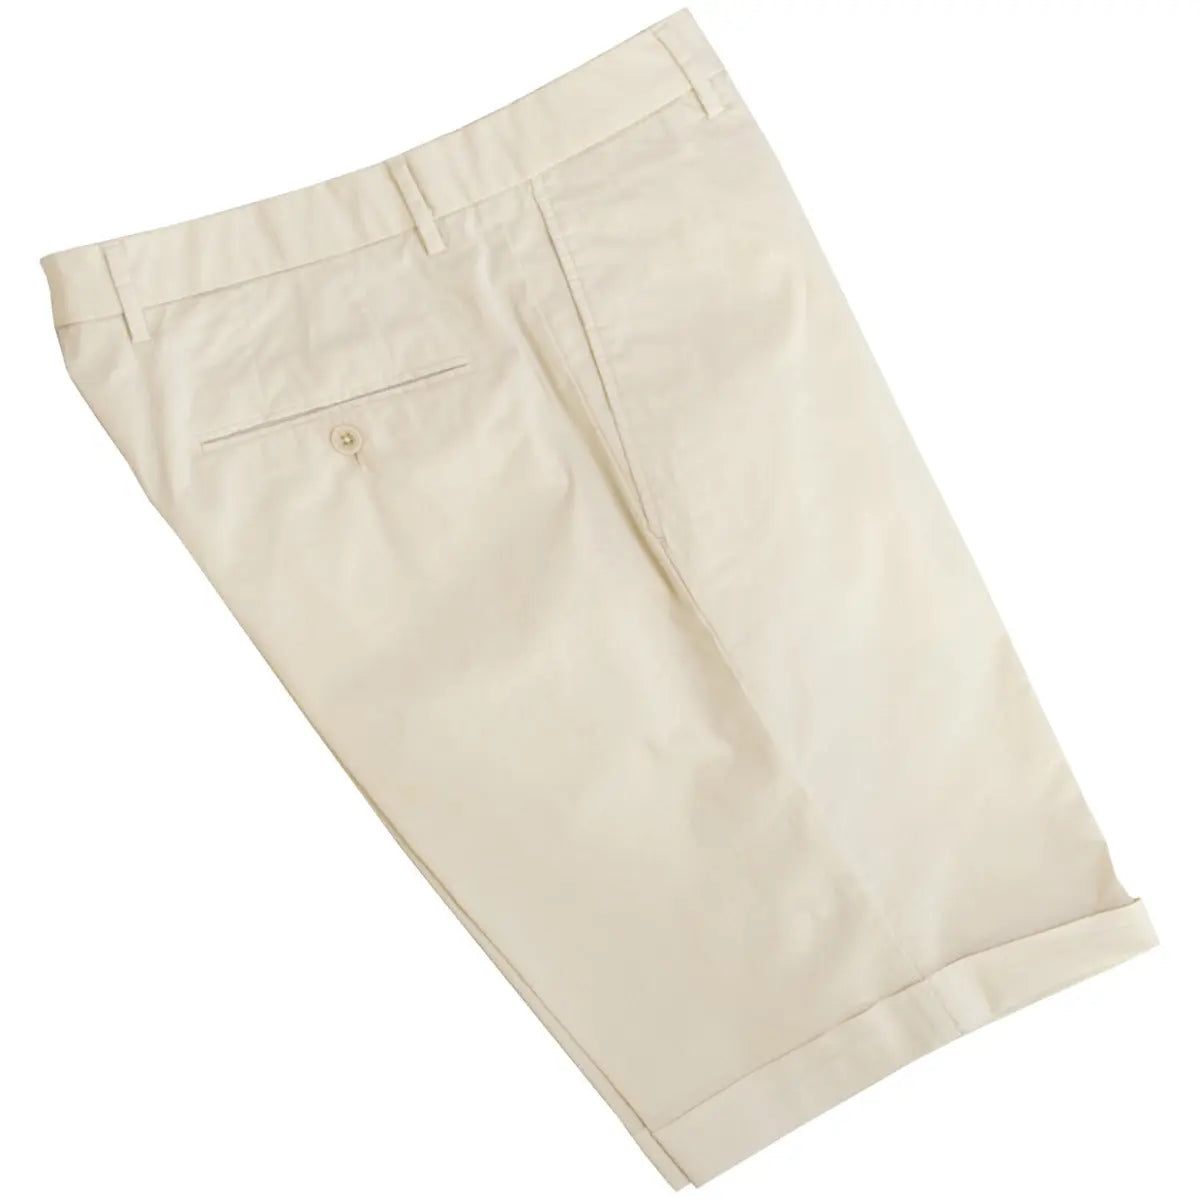 Cream Cotton Stretch Fit Chino Shorts  Robert Old   